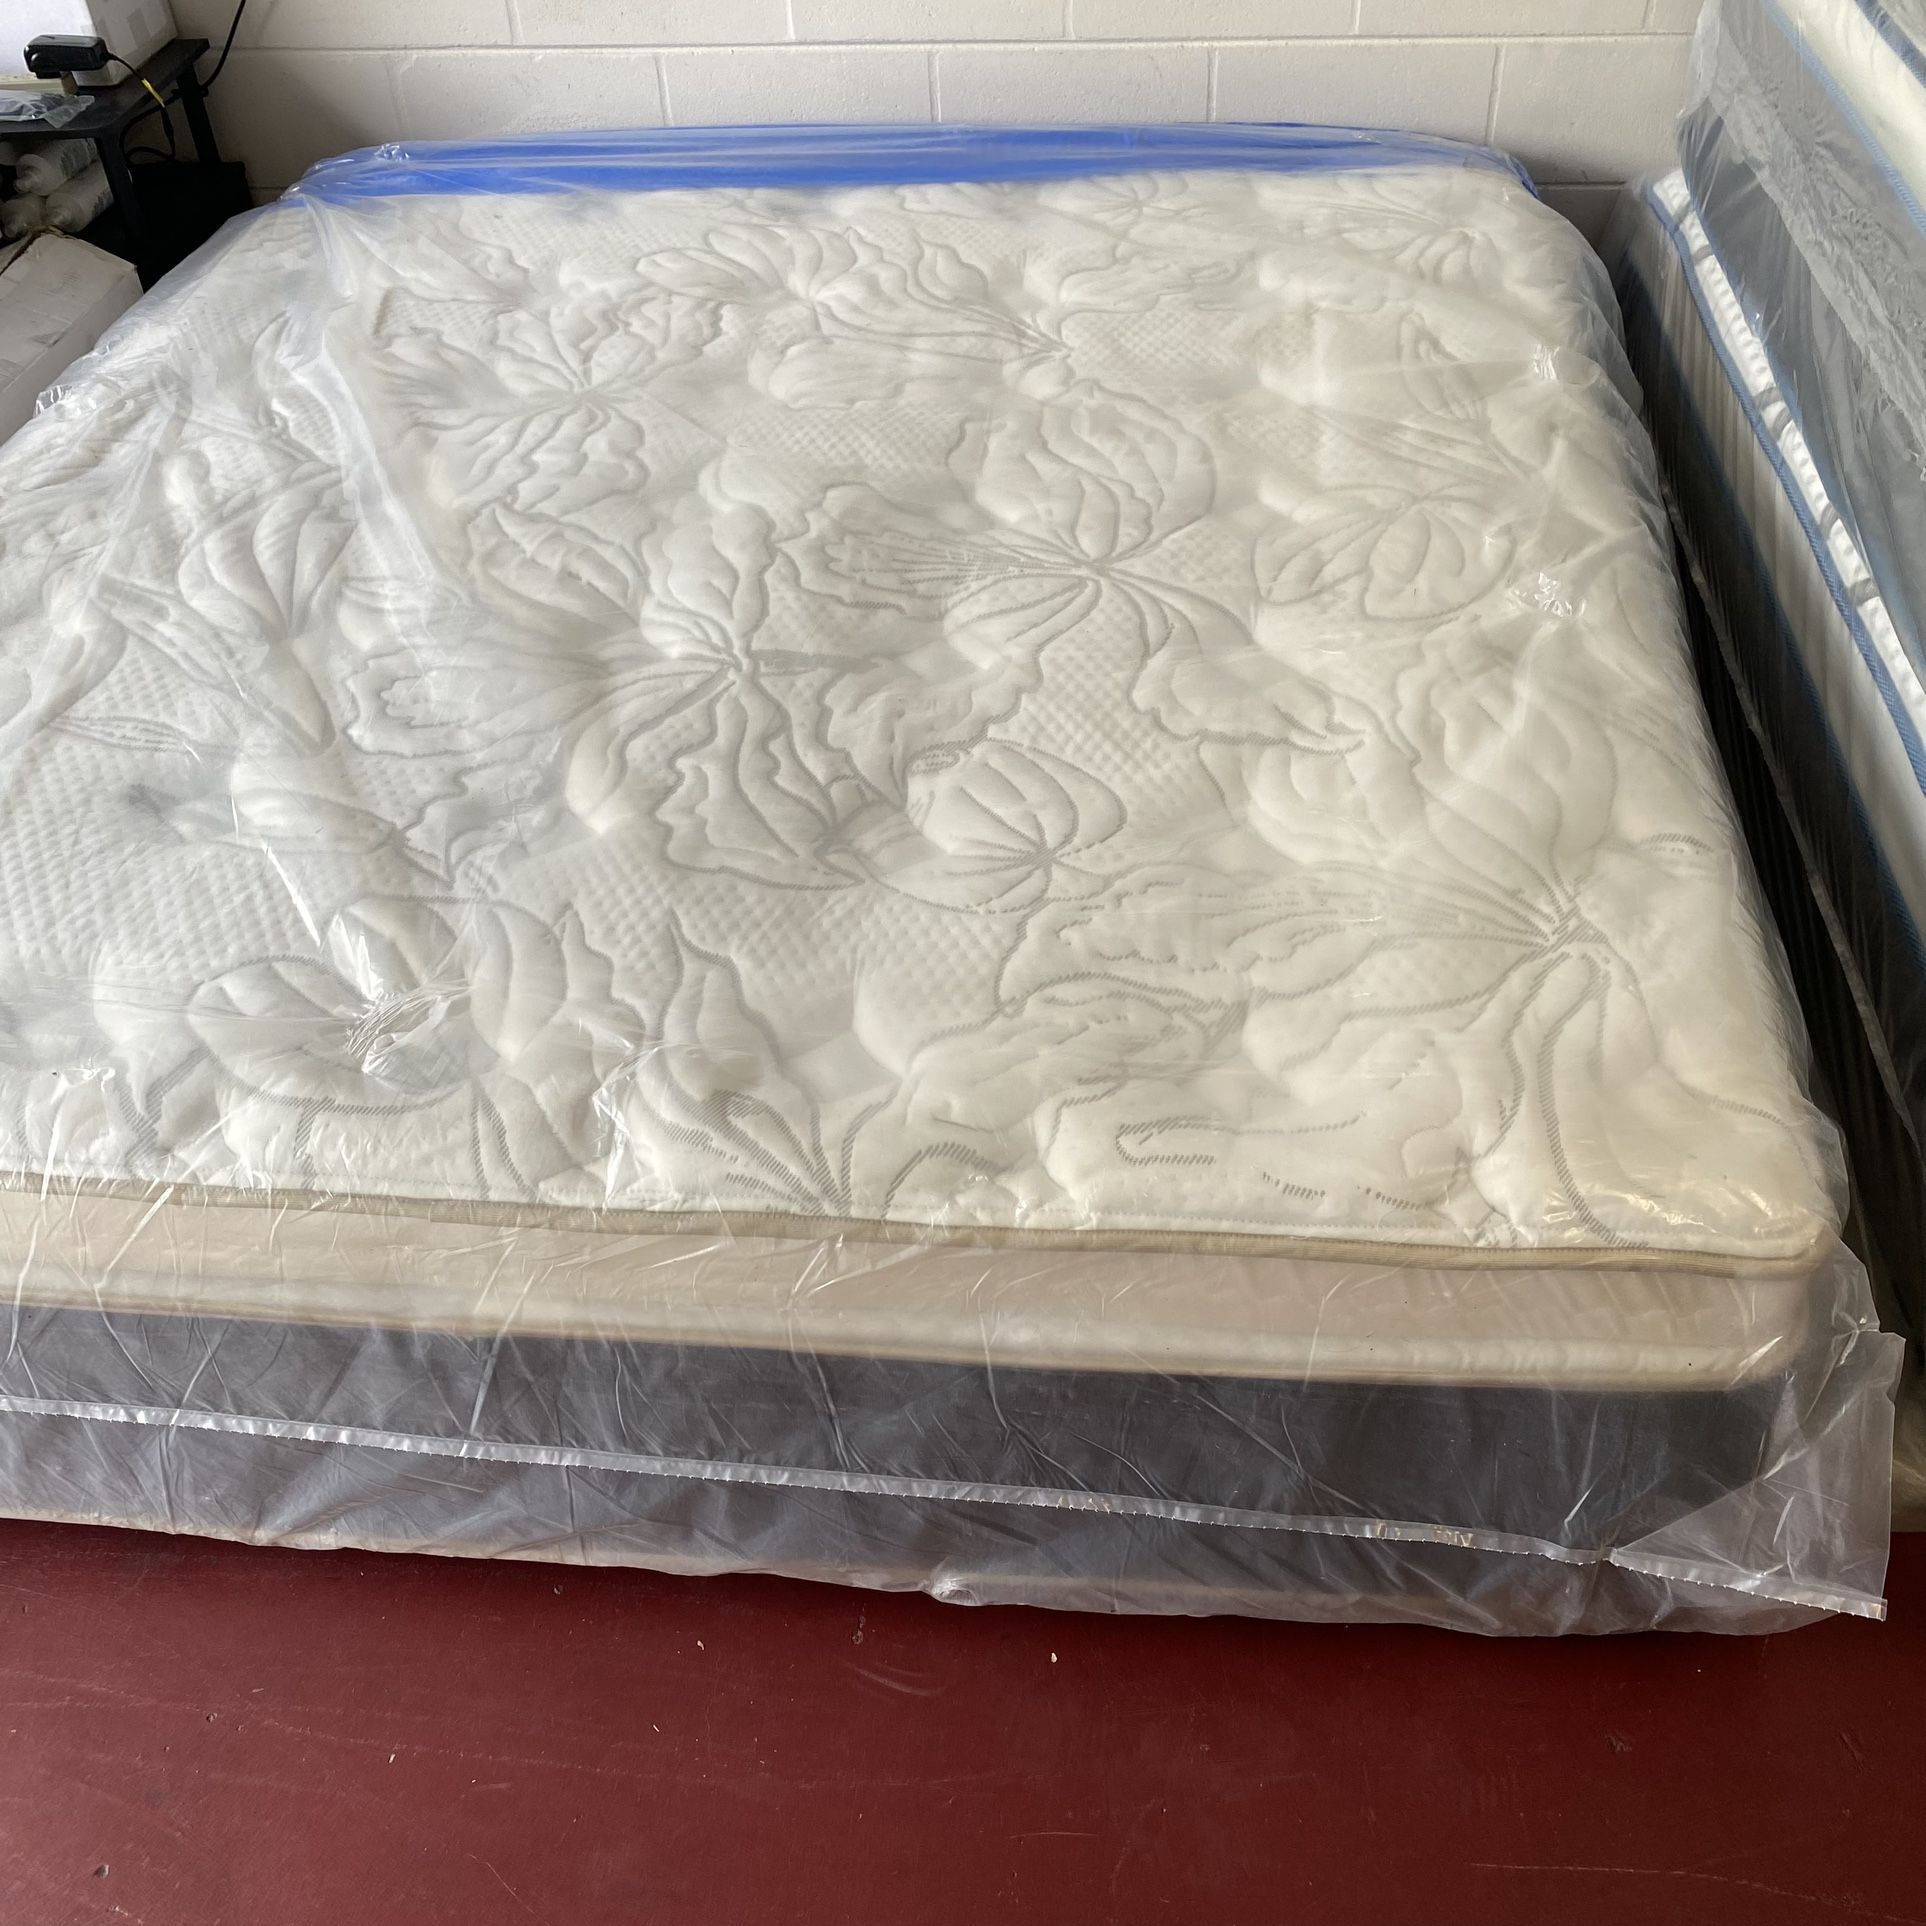 California King Size Mattress Pillow Top 14” Inches Thick Excellent Comfort Also Available: Twin, Full, Queen And King New From Factory Delivery Avail